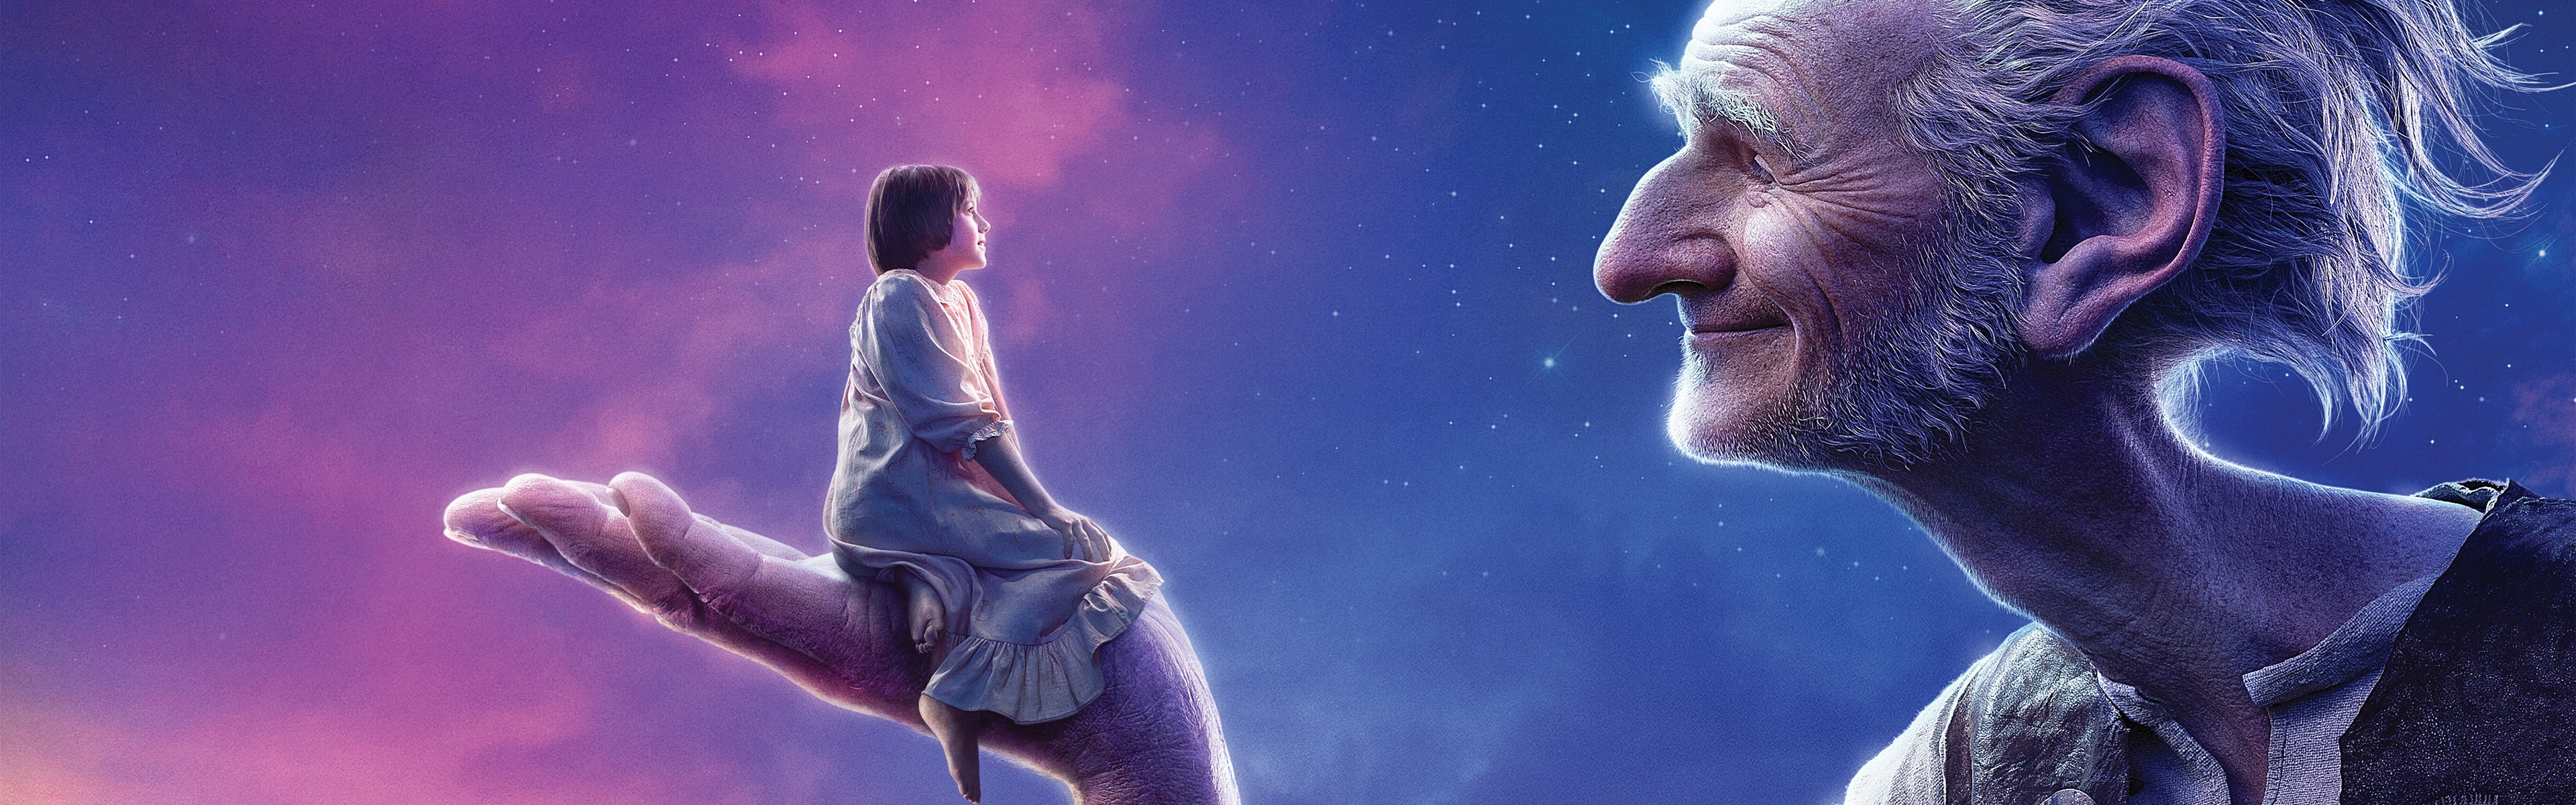 The Bfg (2016) Wallpapers